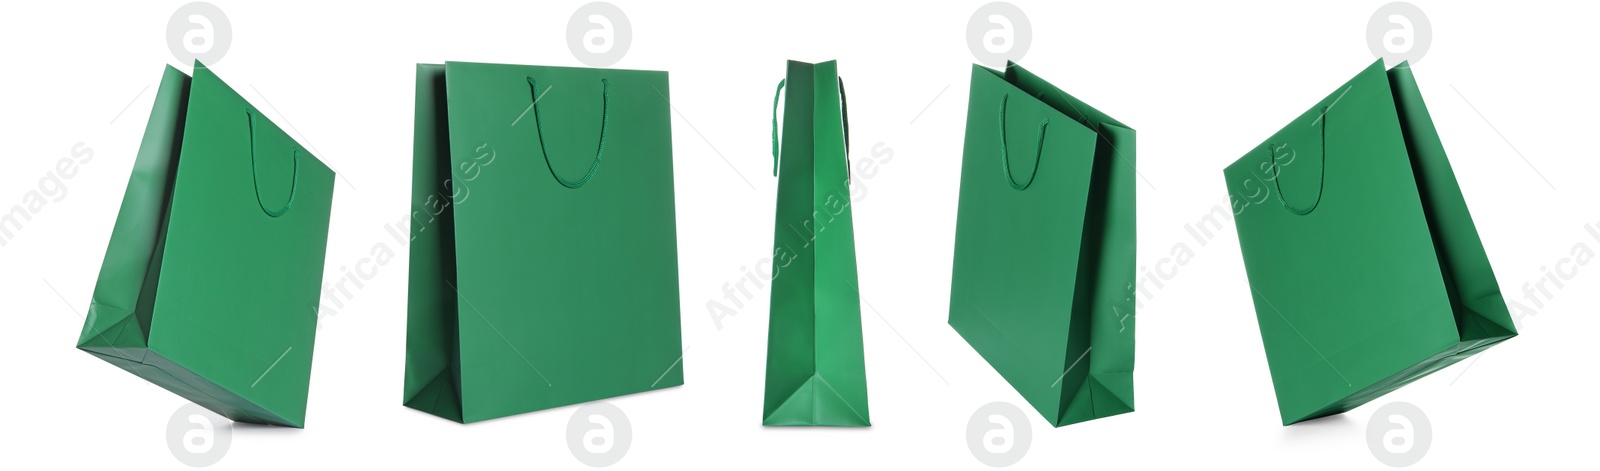 Image of Green shopping bag isolated on white, different sides